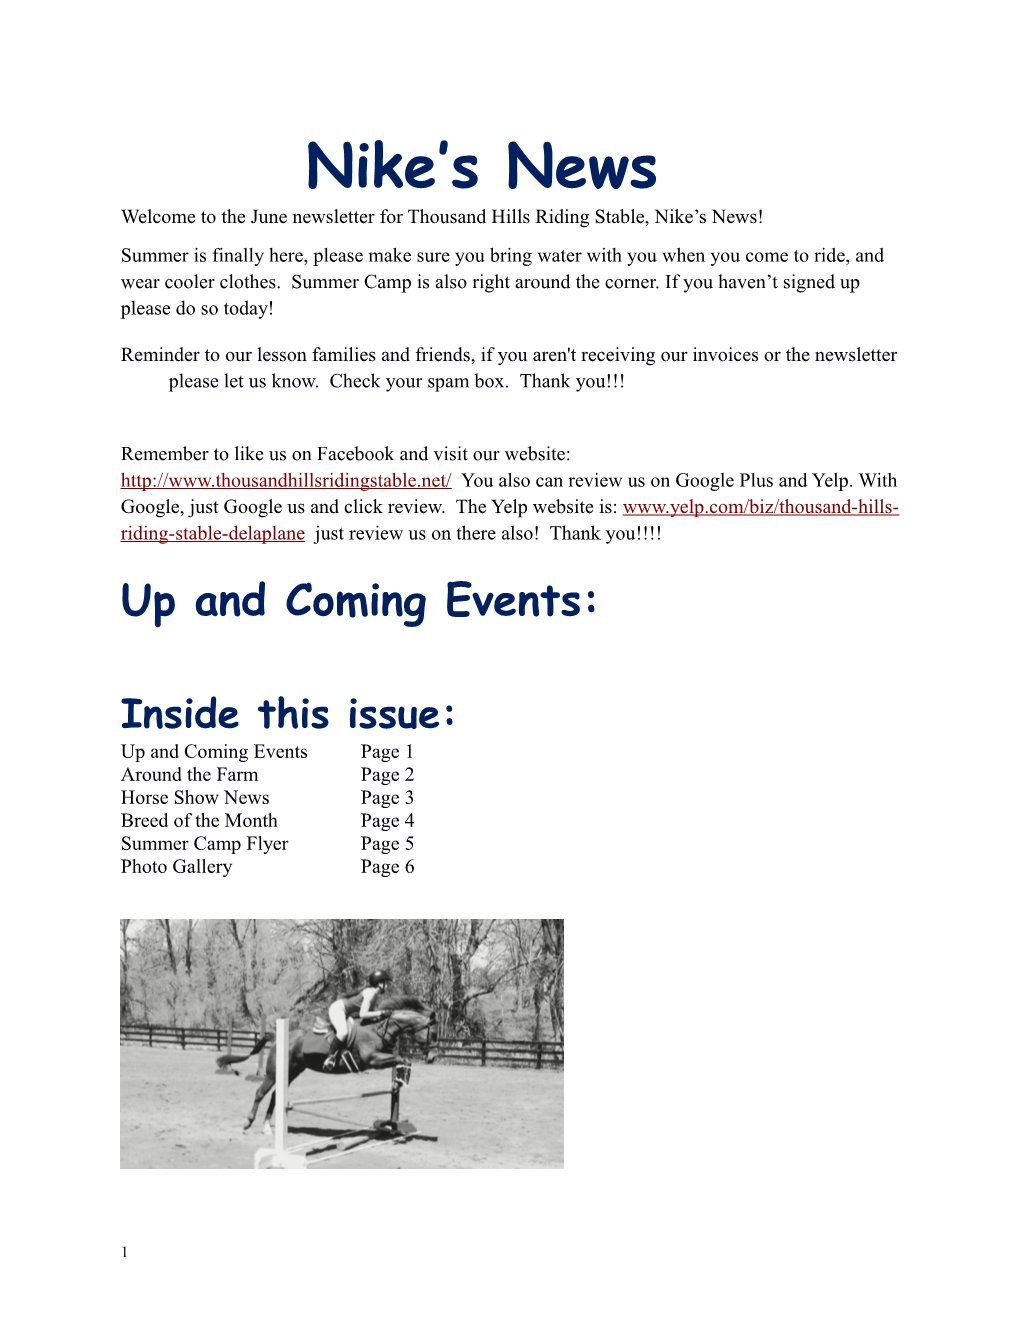 Welcome to the June Newsletter for Thousand Hills Riding Stable, Nike S News!